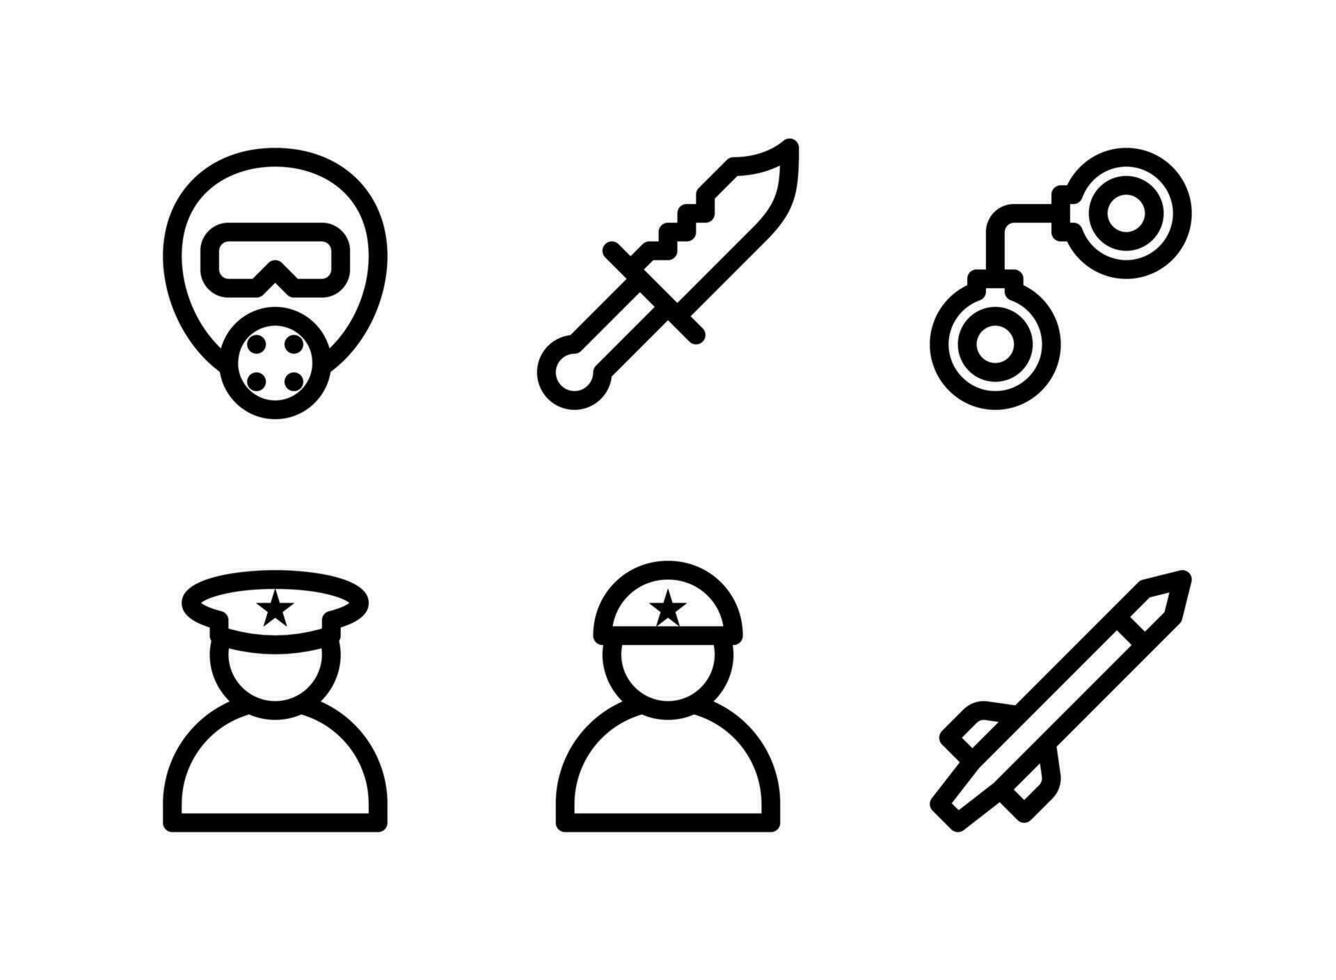 Simple Set of Military Related Vector Line Icons. Contains Icons as Gas Mask, Knife, Handcuffs, Soldier and more.